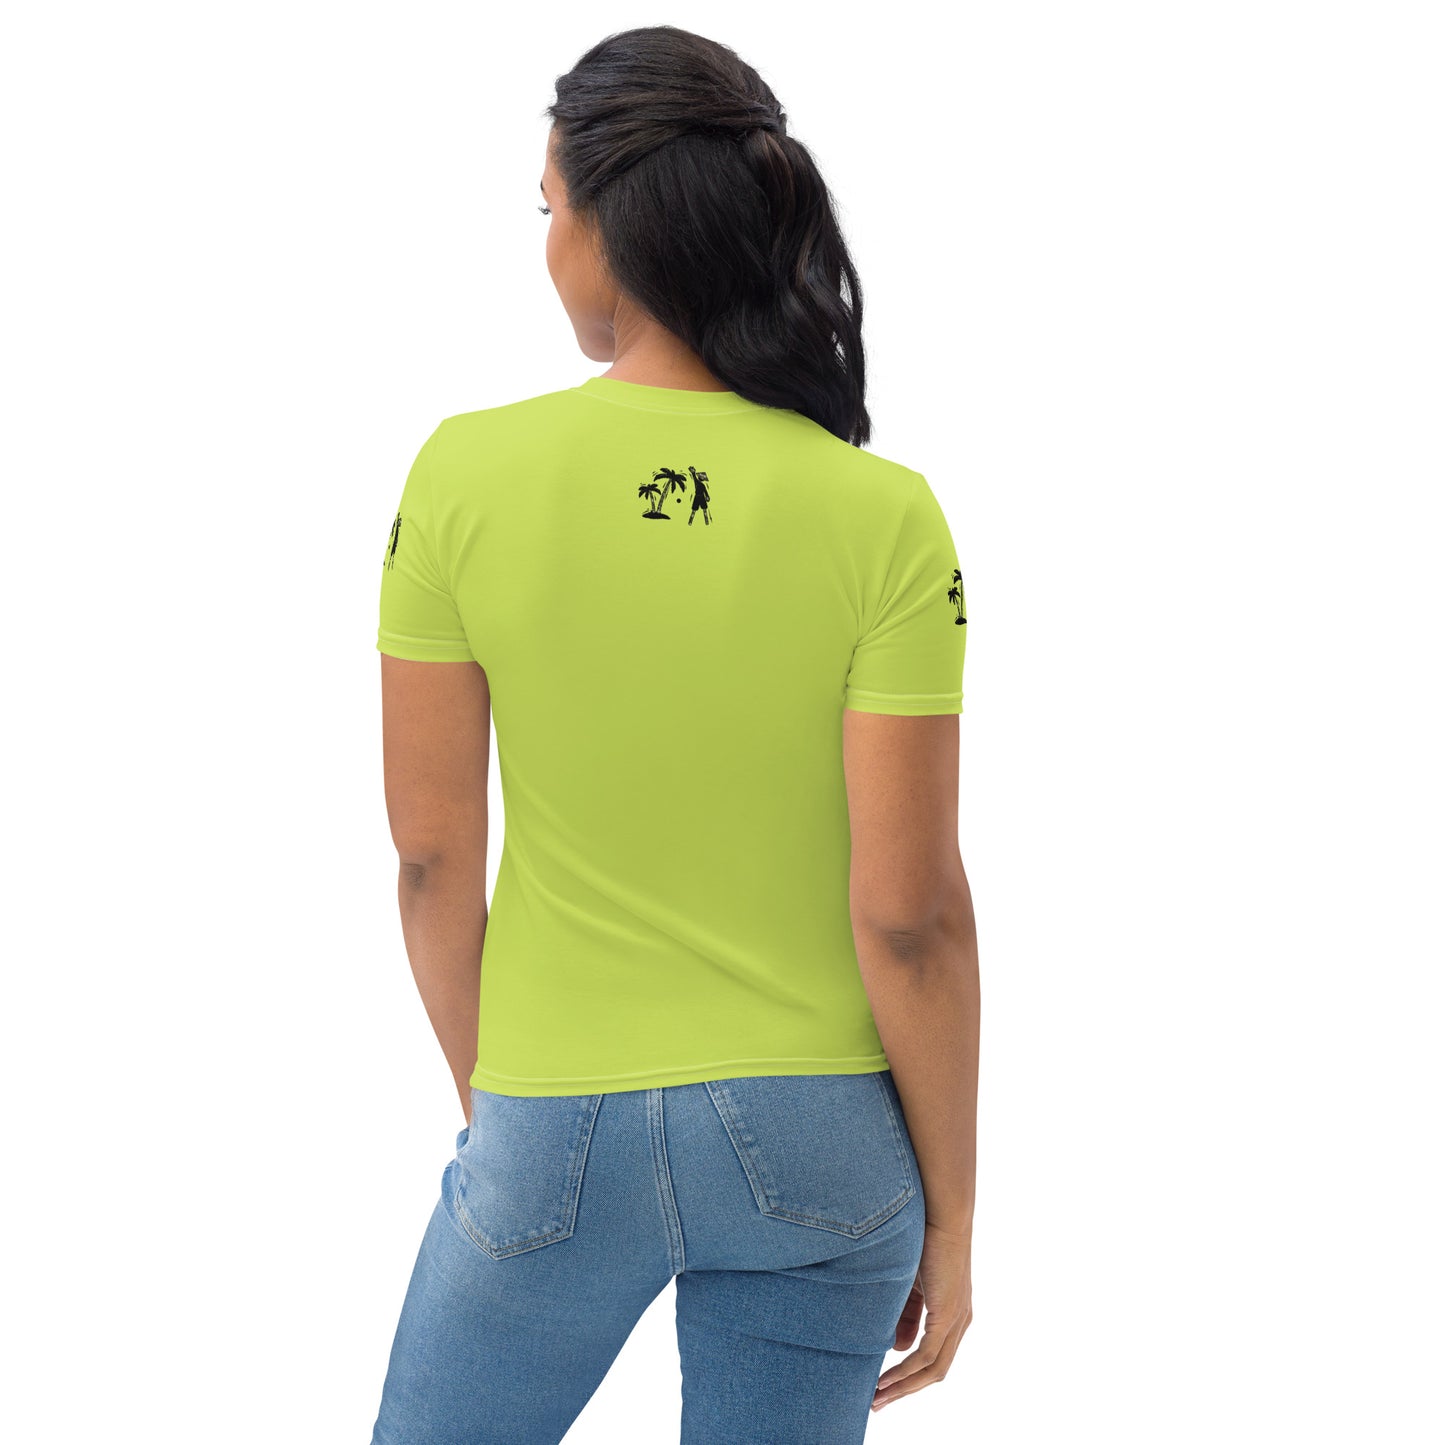 Fluorescent Green V.Localized (Camo) Women’s Dry-Fit T-Shirt